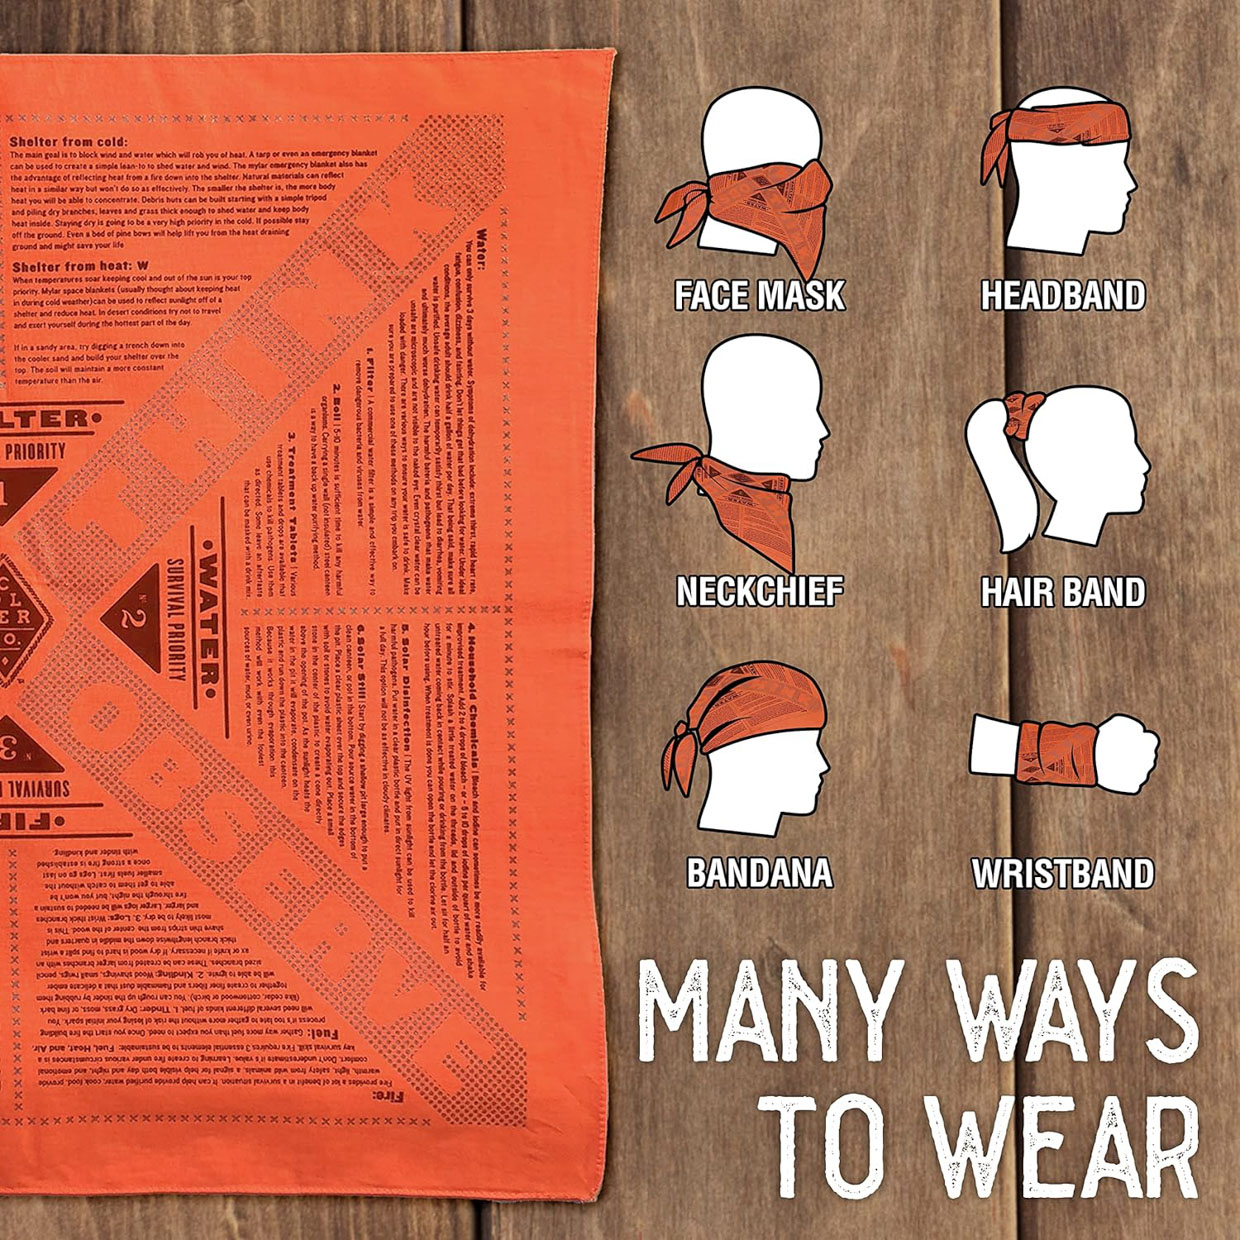 This Survival Bandana Could Save Your Life If You're Lost in the Woods